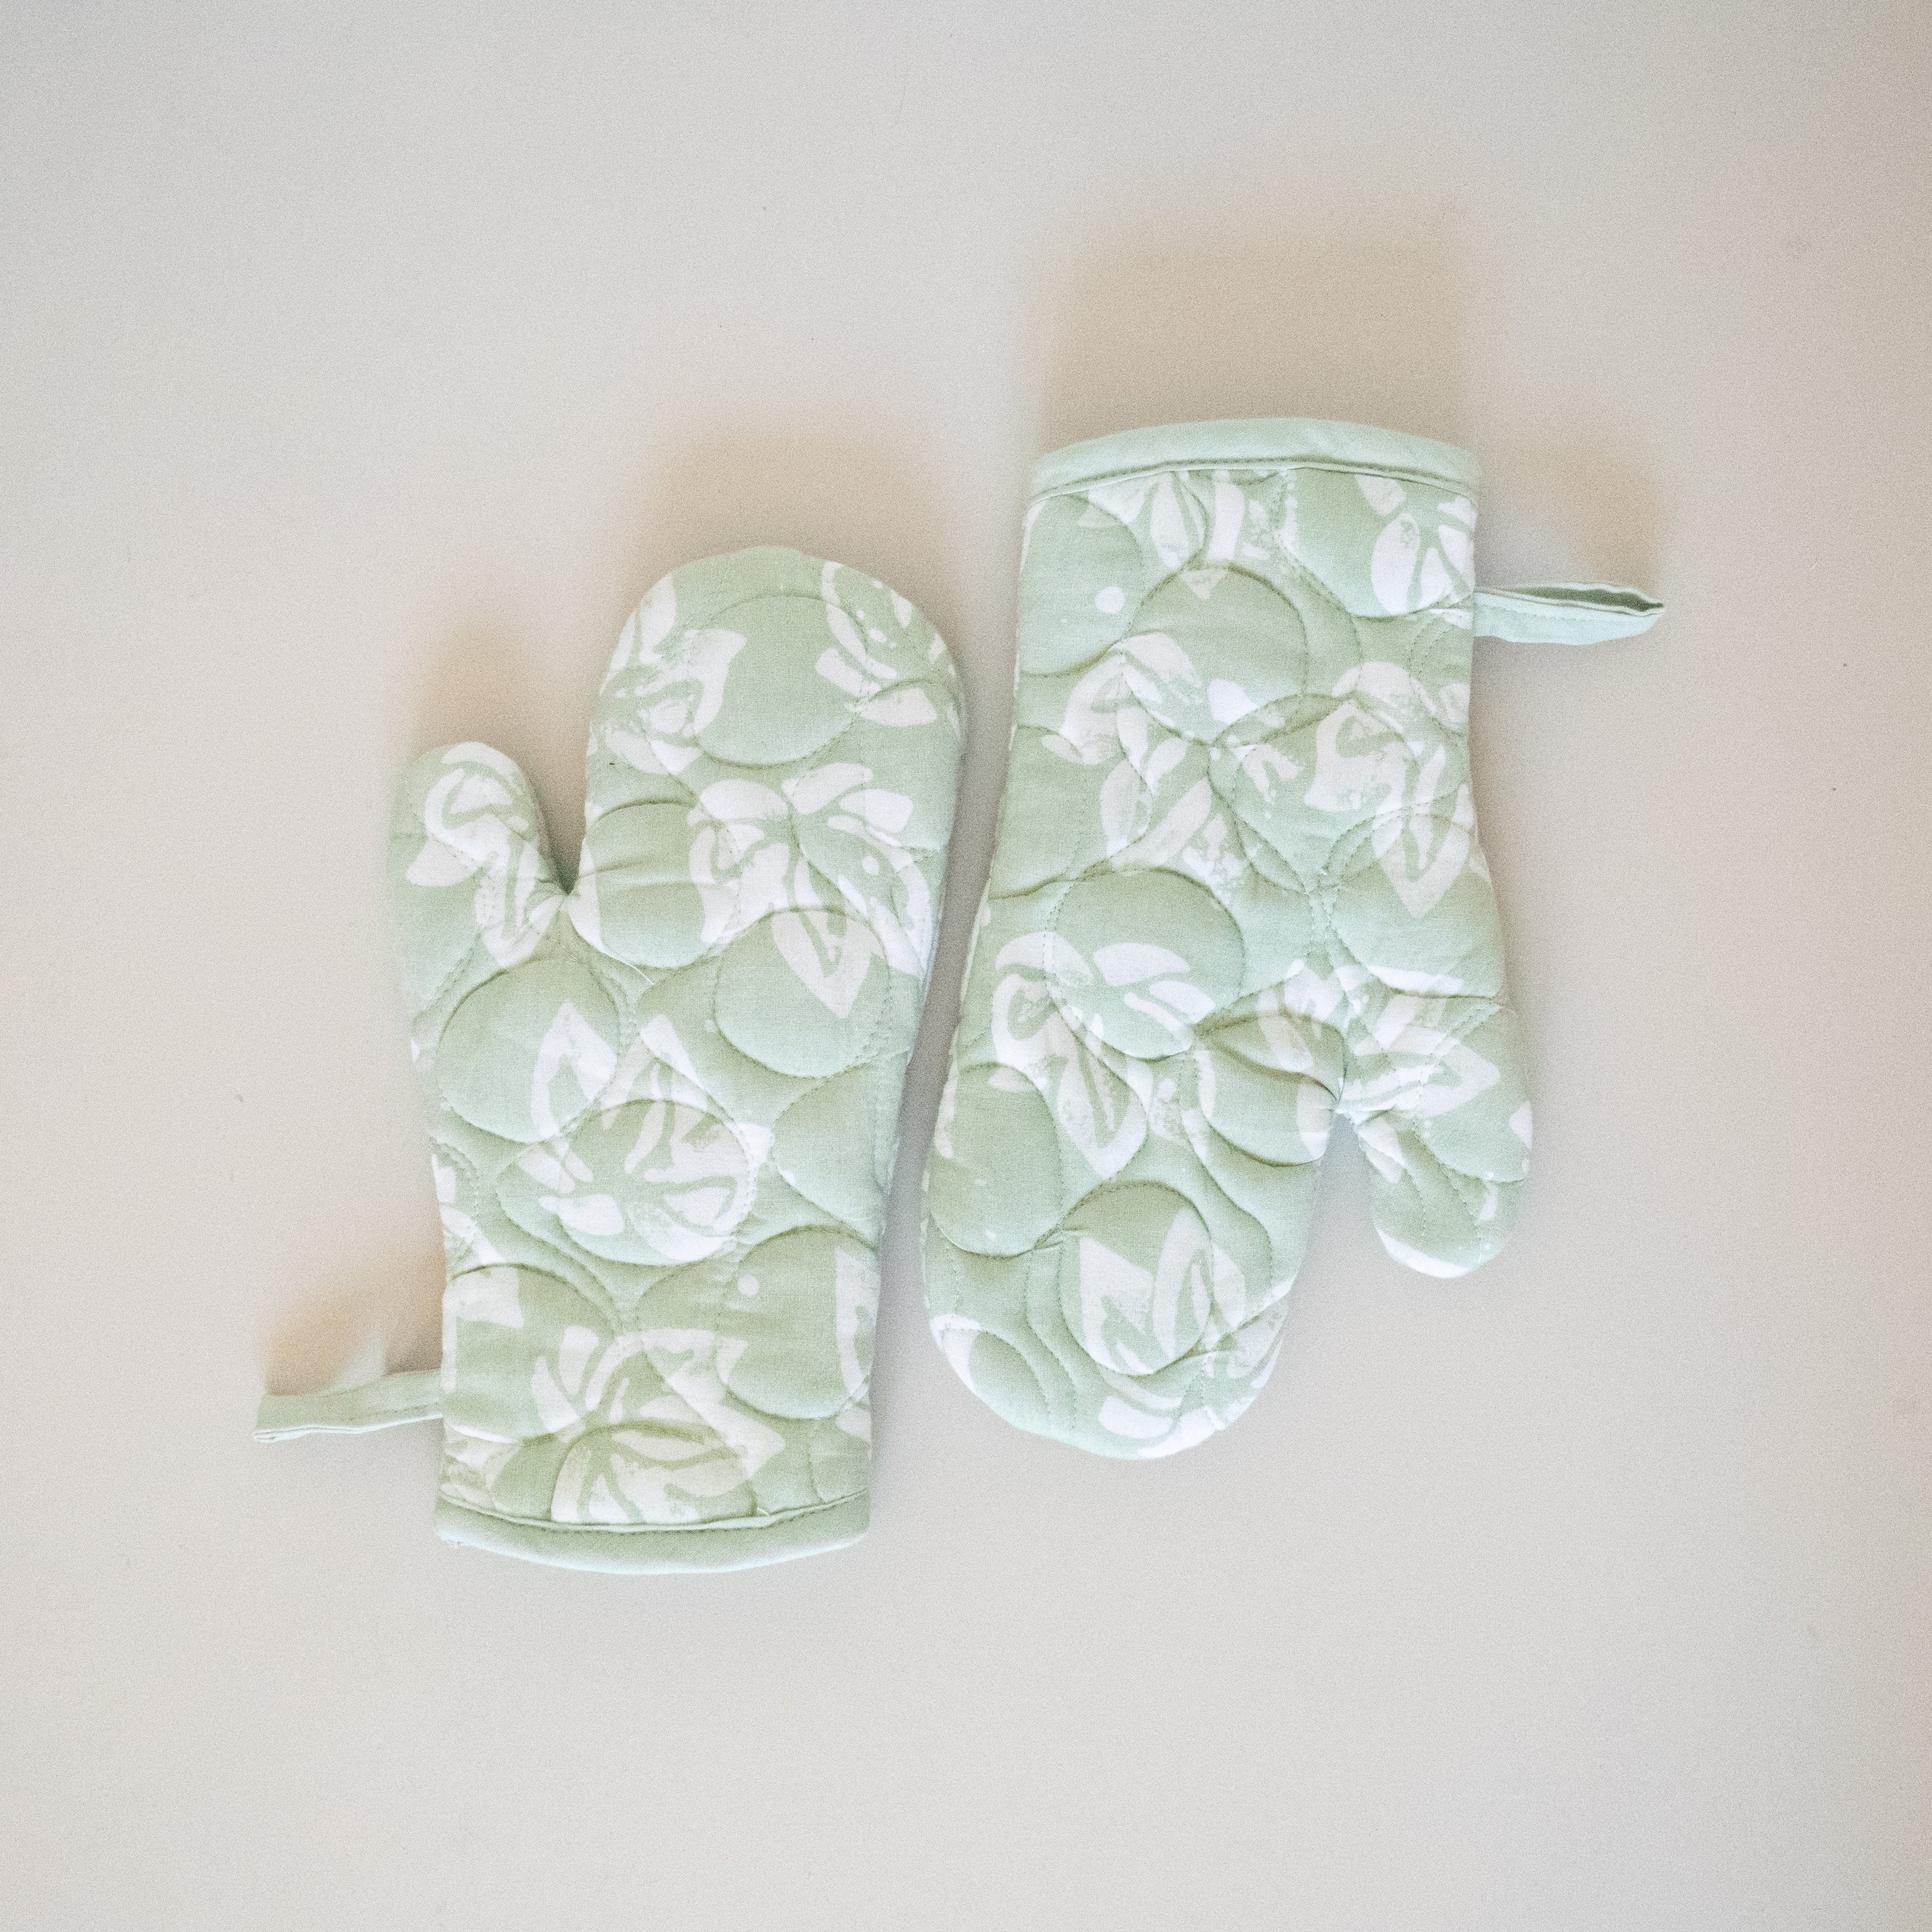 Oven Mitts | Batik - handmade by the women of Amani using Kenyan materials for a Fair Trade boutique